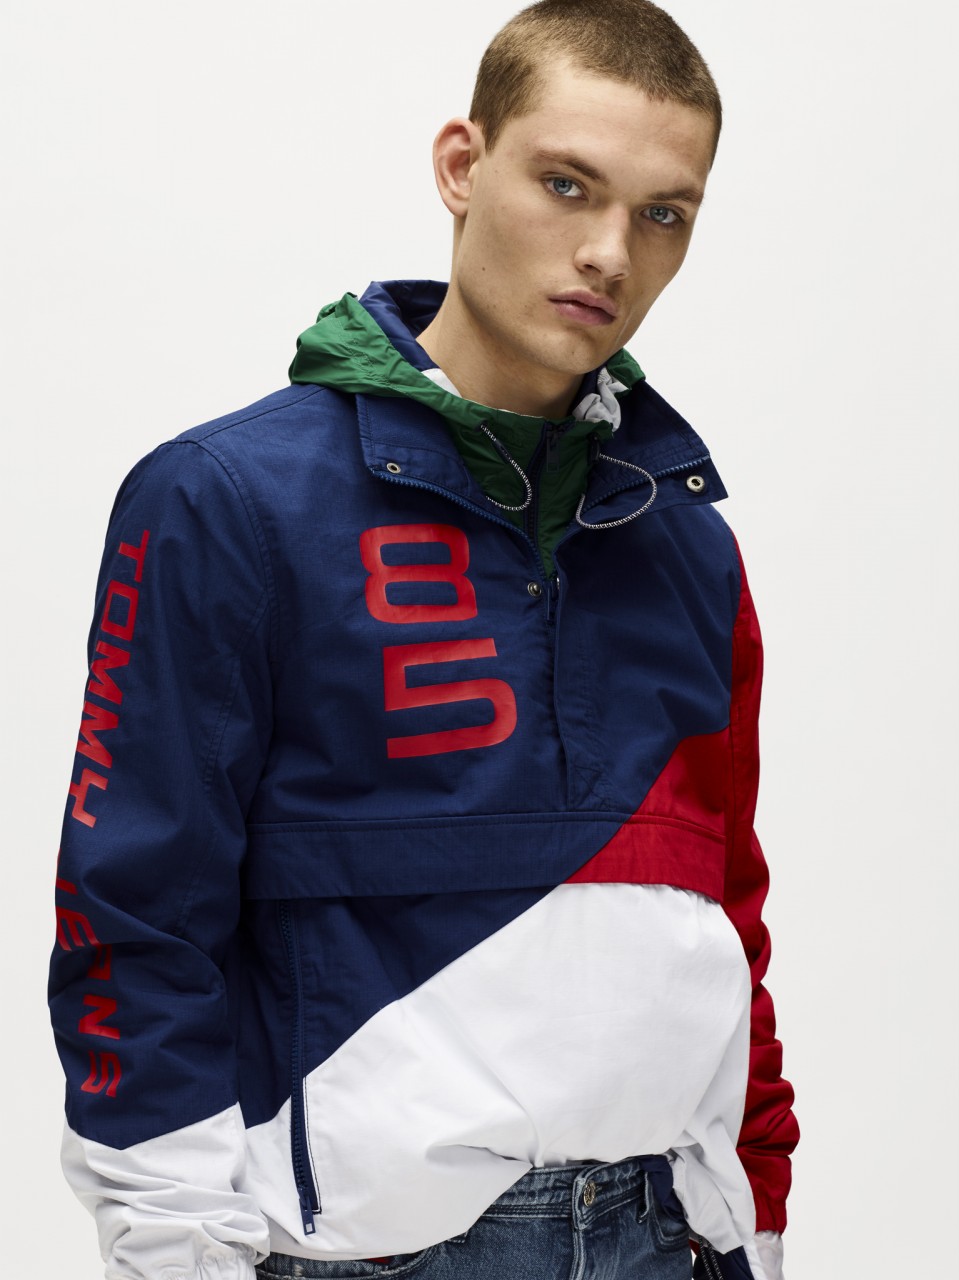 Tommy Jeans Is The New Name Of Tommy Hilfiger's Denim Label – Lipstiq.com